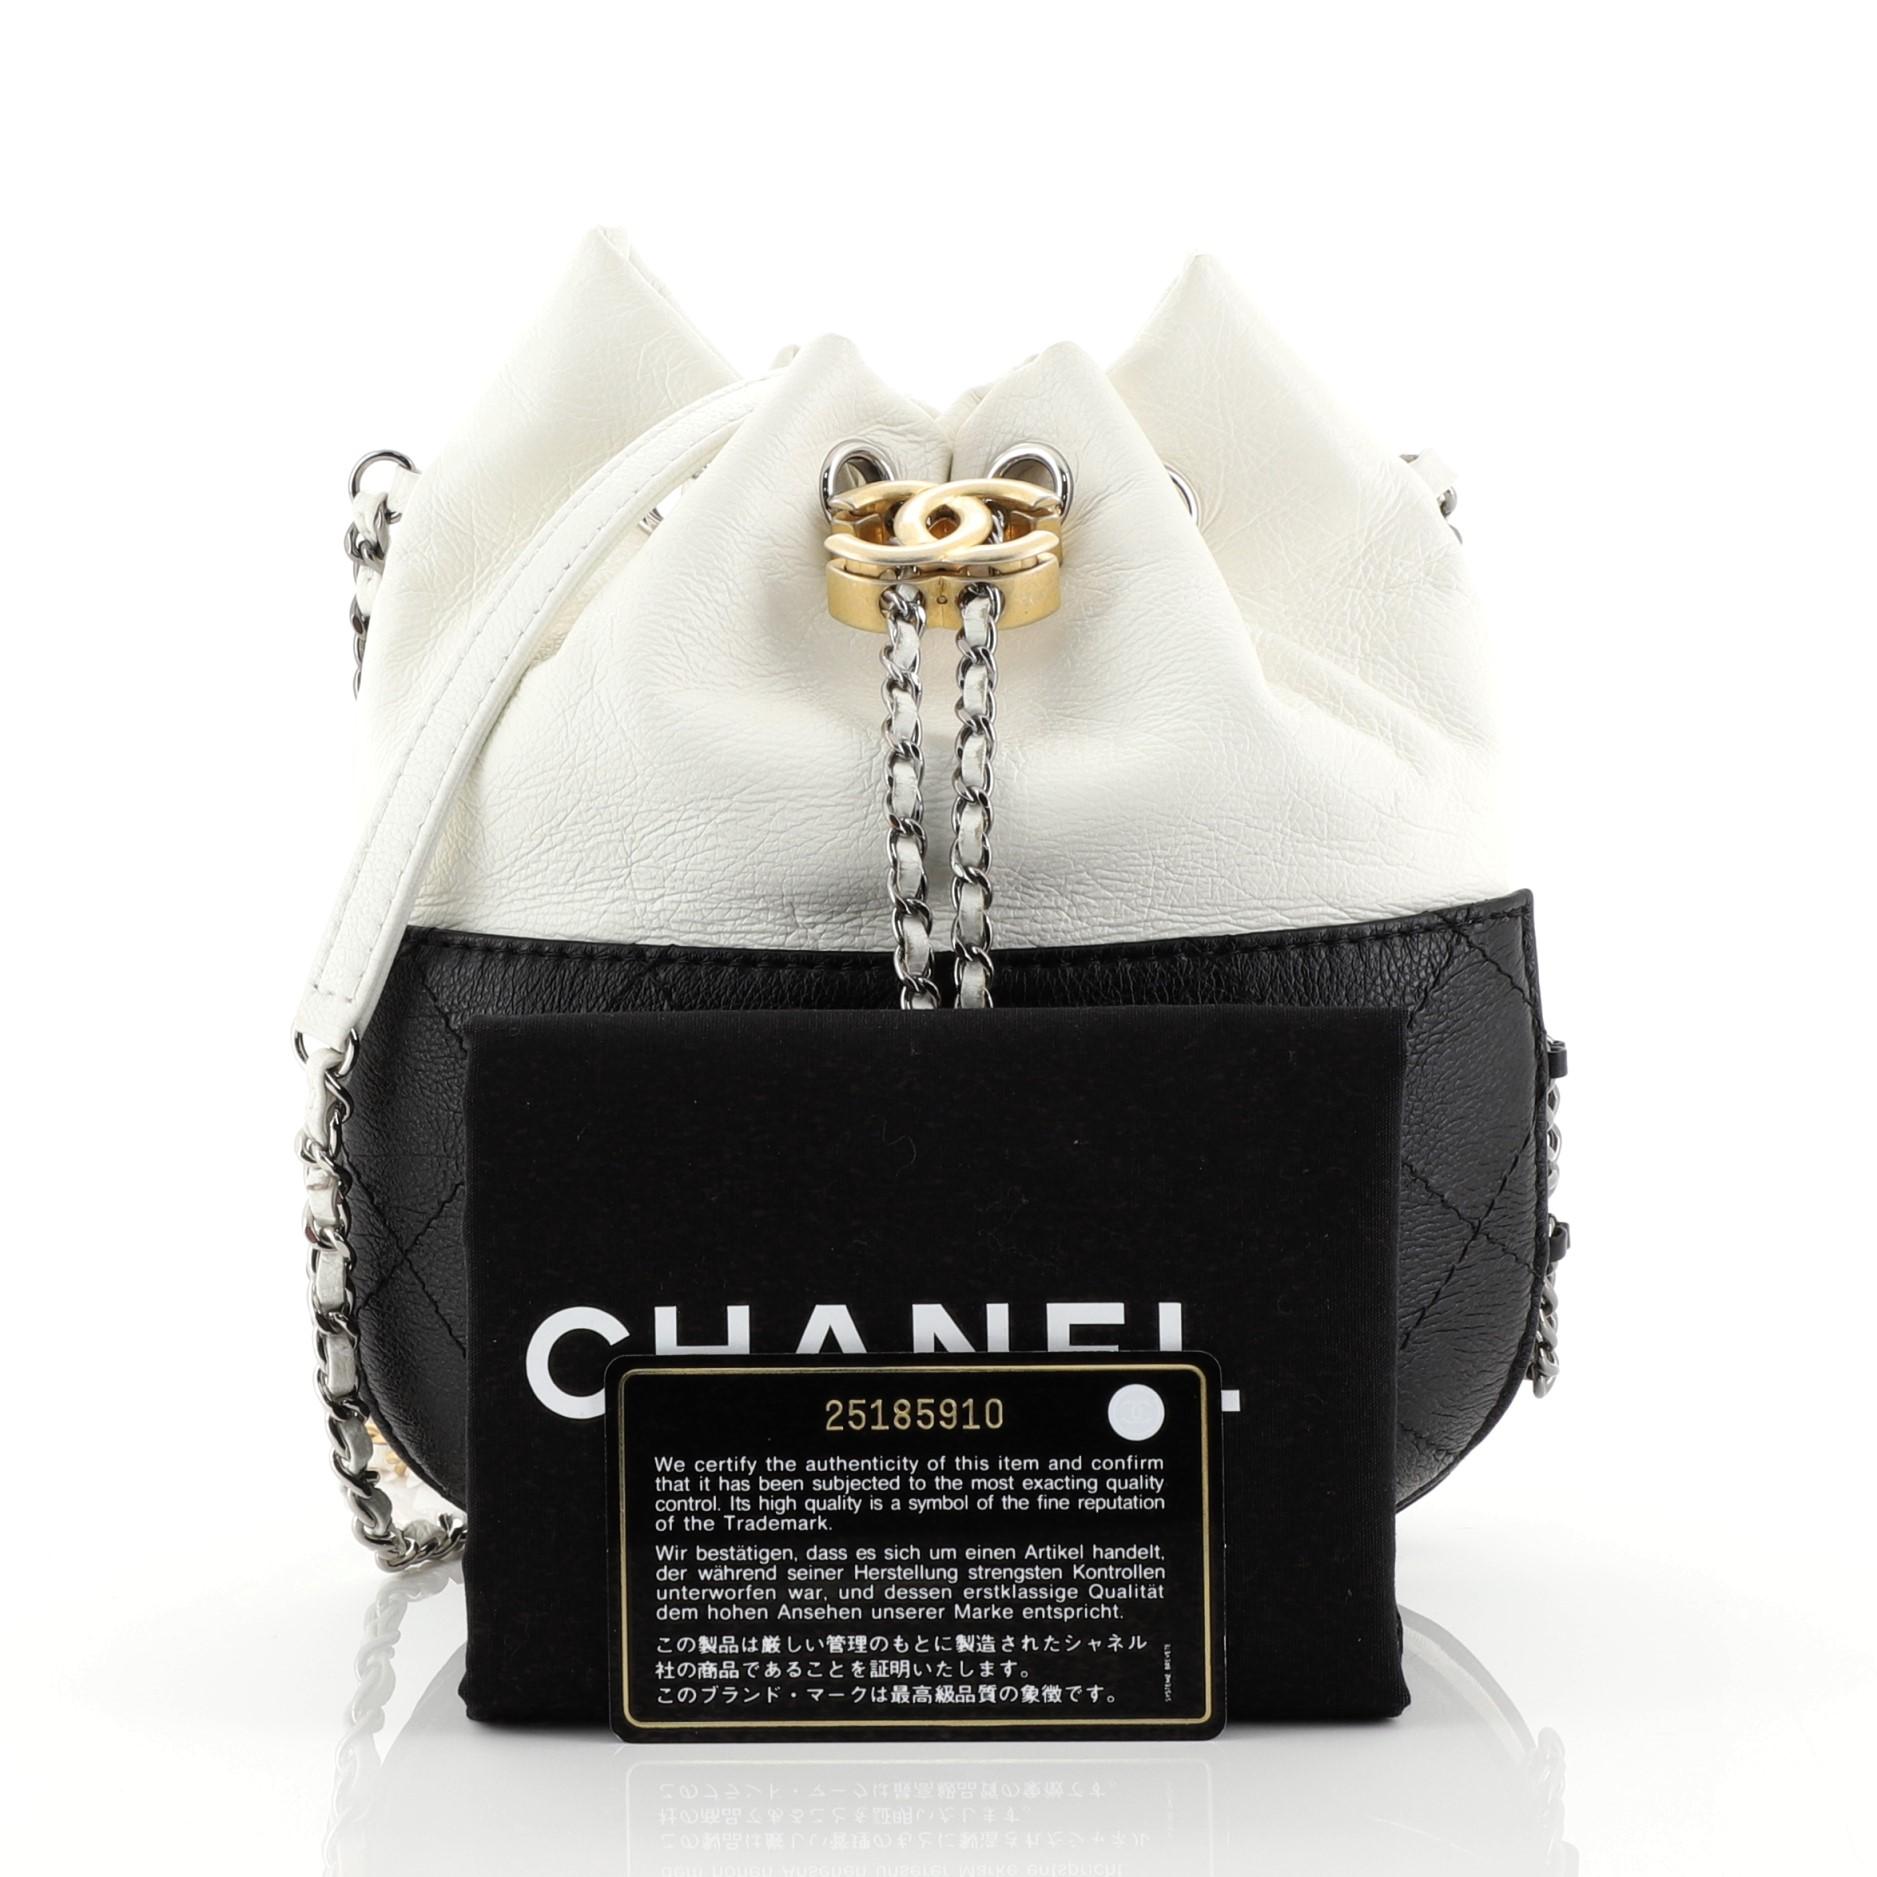 This Chanel Gabrielle Drawstring Bag Quilted Calfskin Small, crafted in white and black quilted calfskin leather, features woven-in leather chain strap with leather pad, drawstring with CC logo accent, and silver, gunmetal and gold-tone hardware.